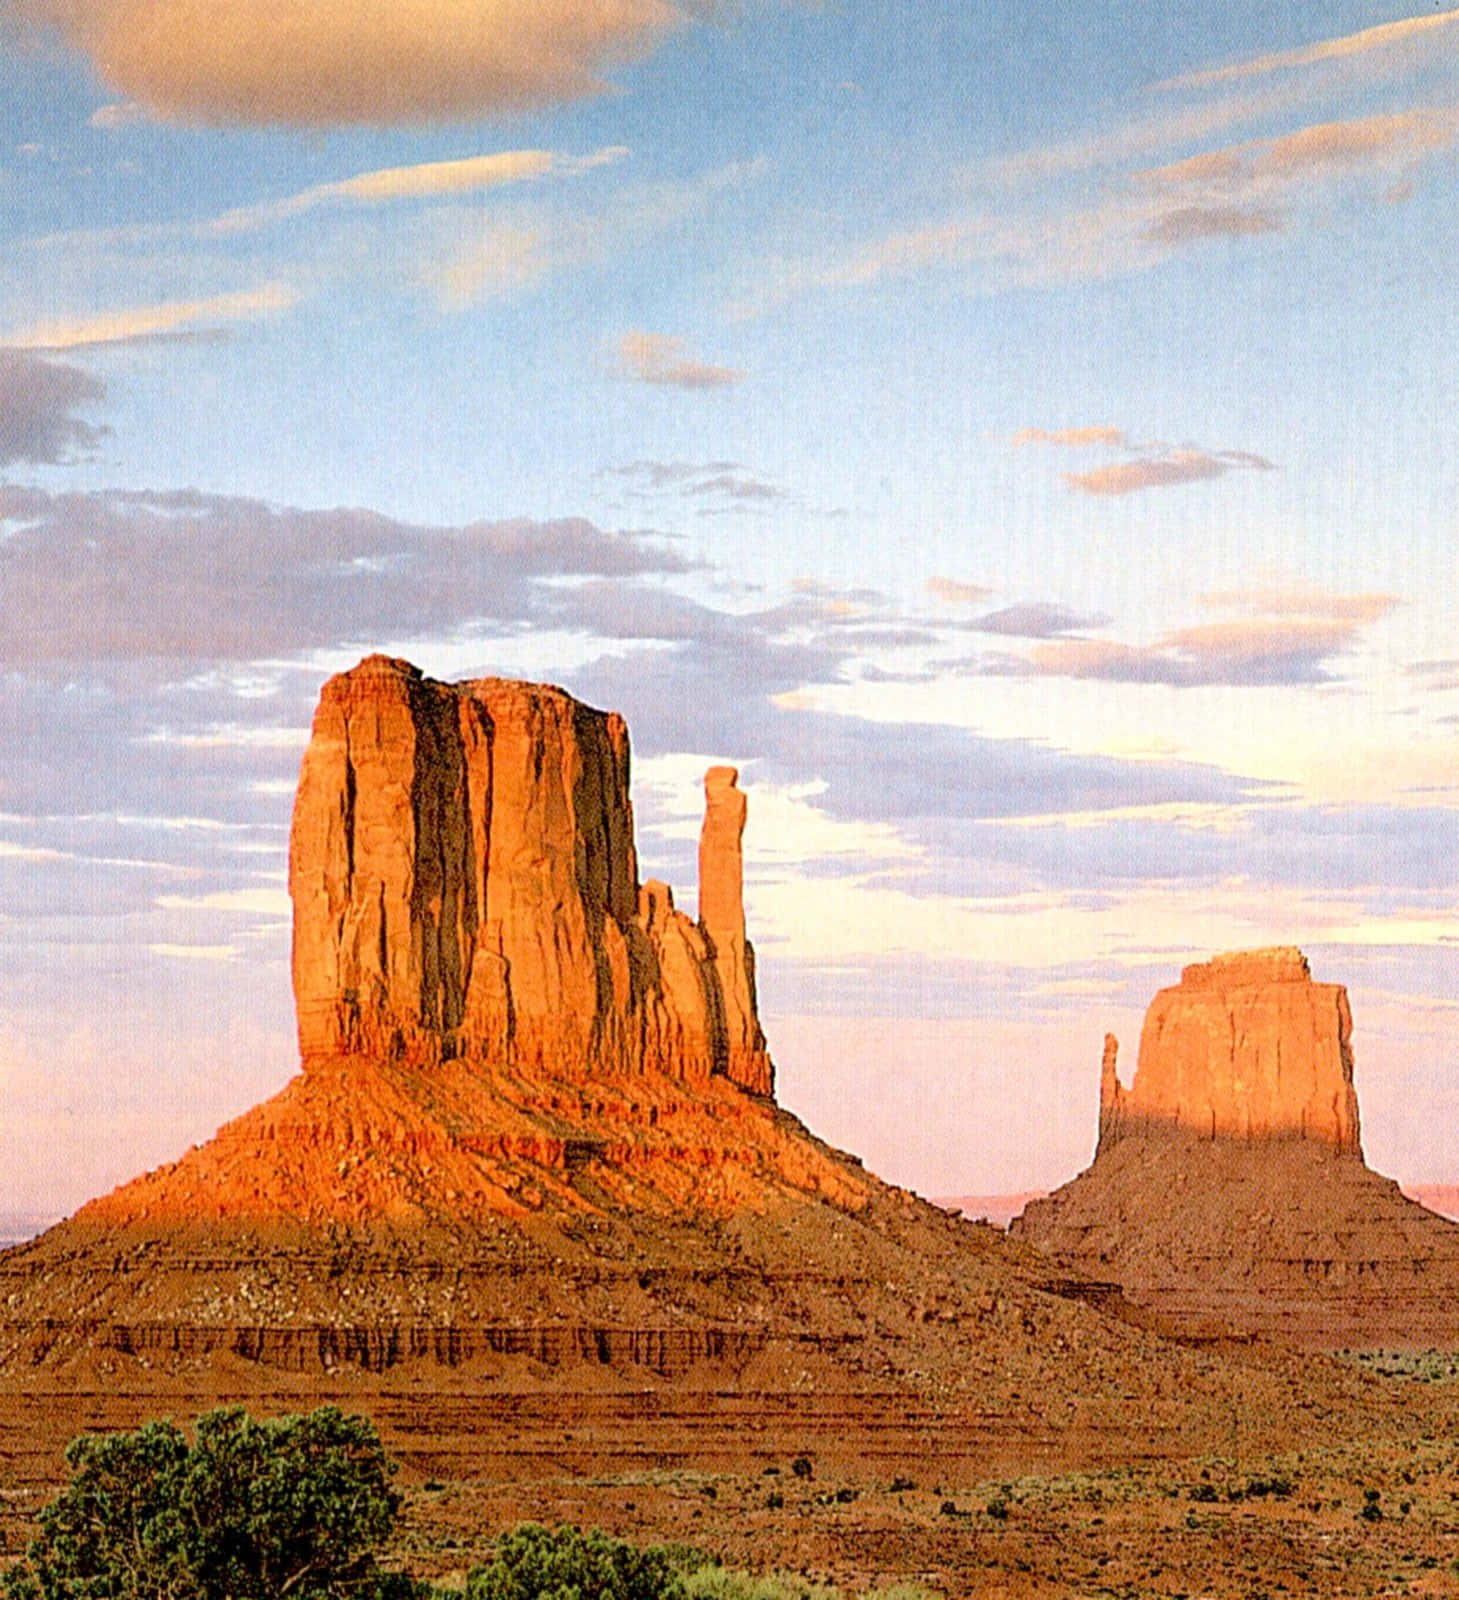 Caption: The Majestic Mittens of Monument Valley Navajo Tribal Park Wallpaper